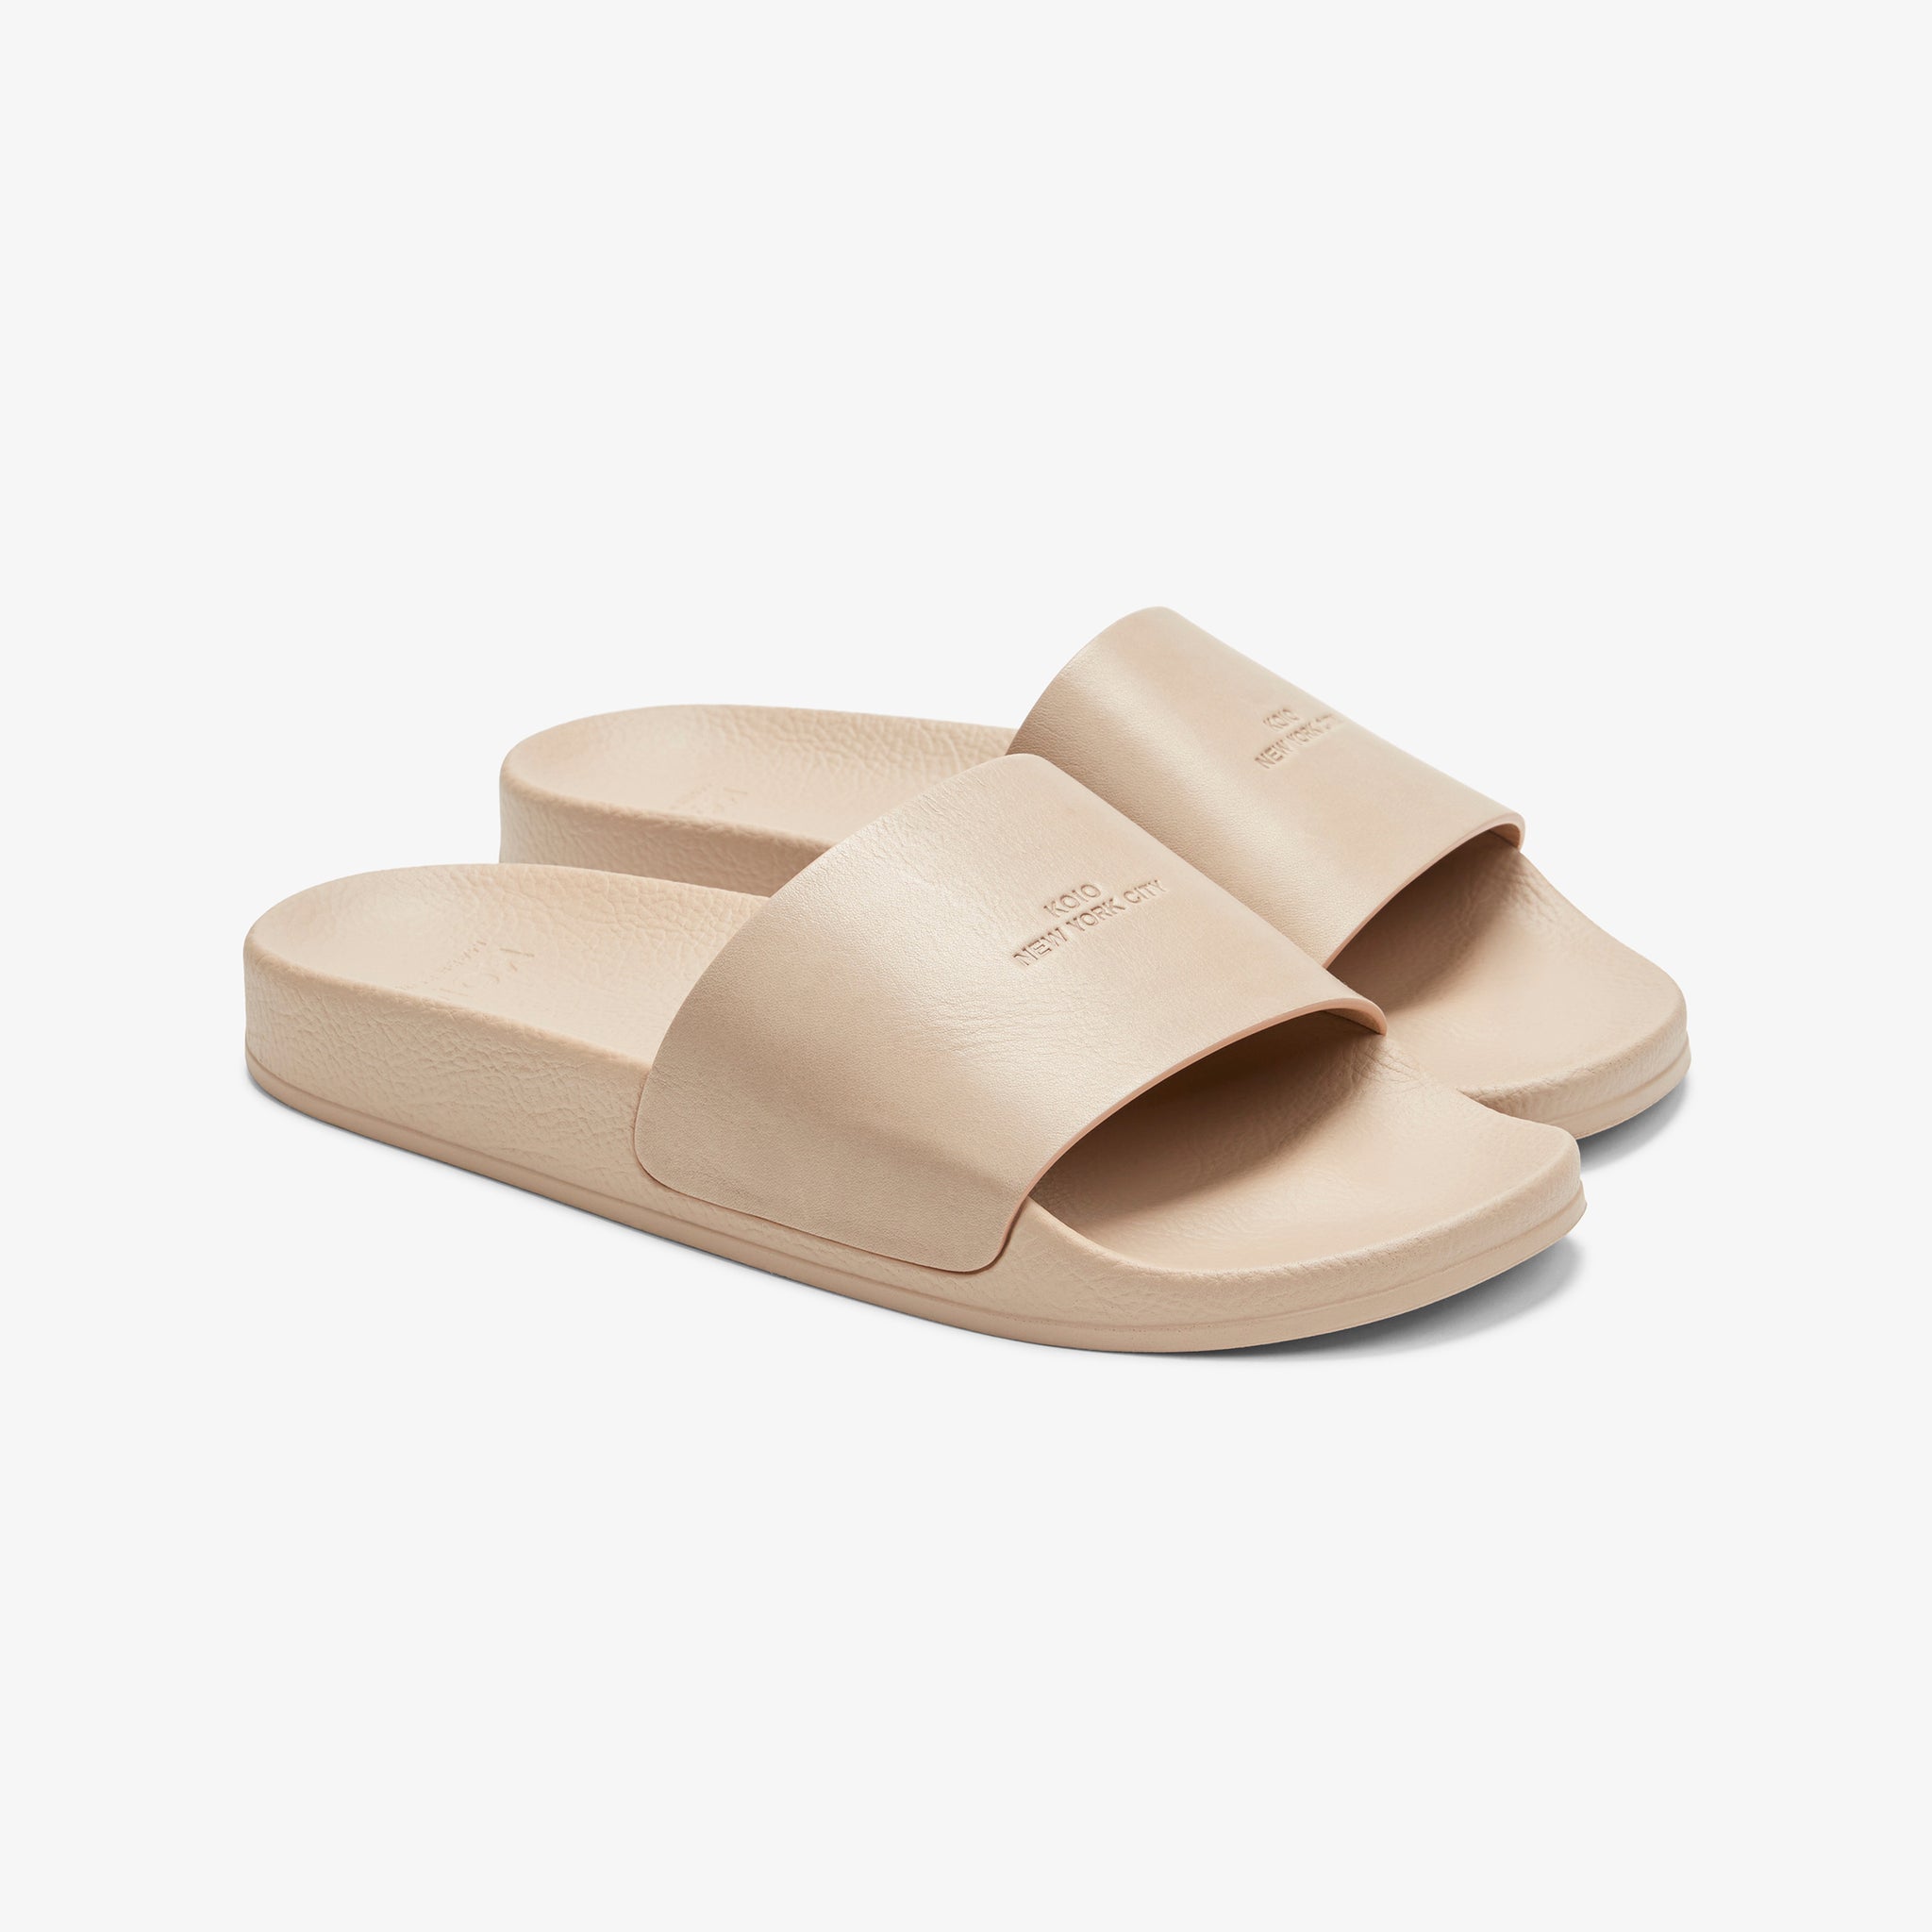 Packshot image of the KOIO Elba Slide - Leather in Taupe 